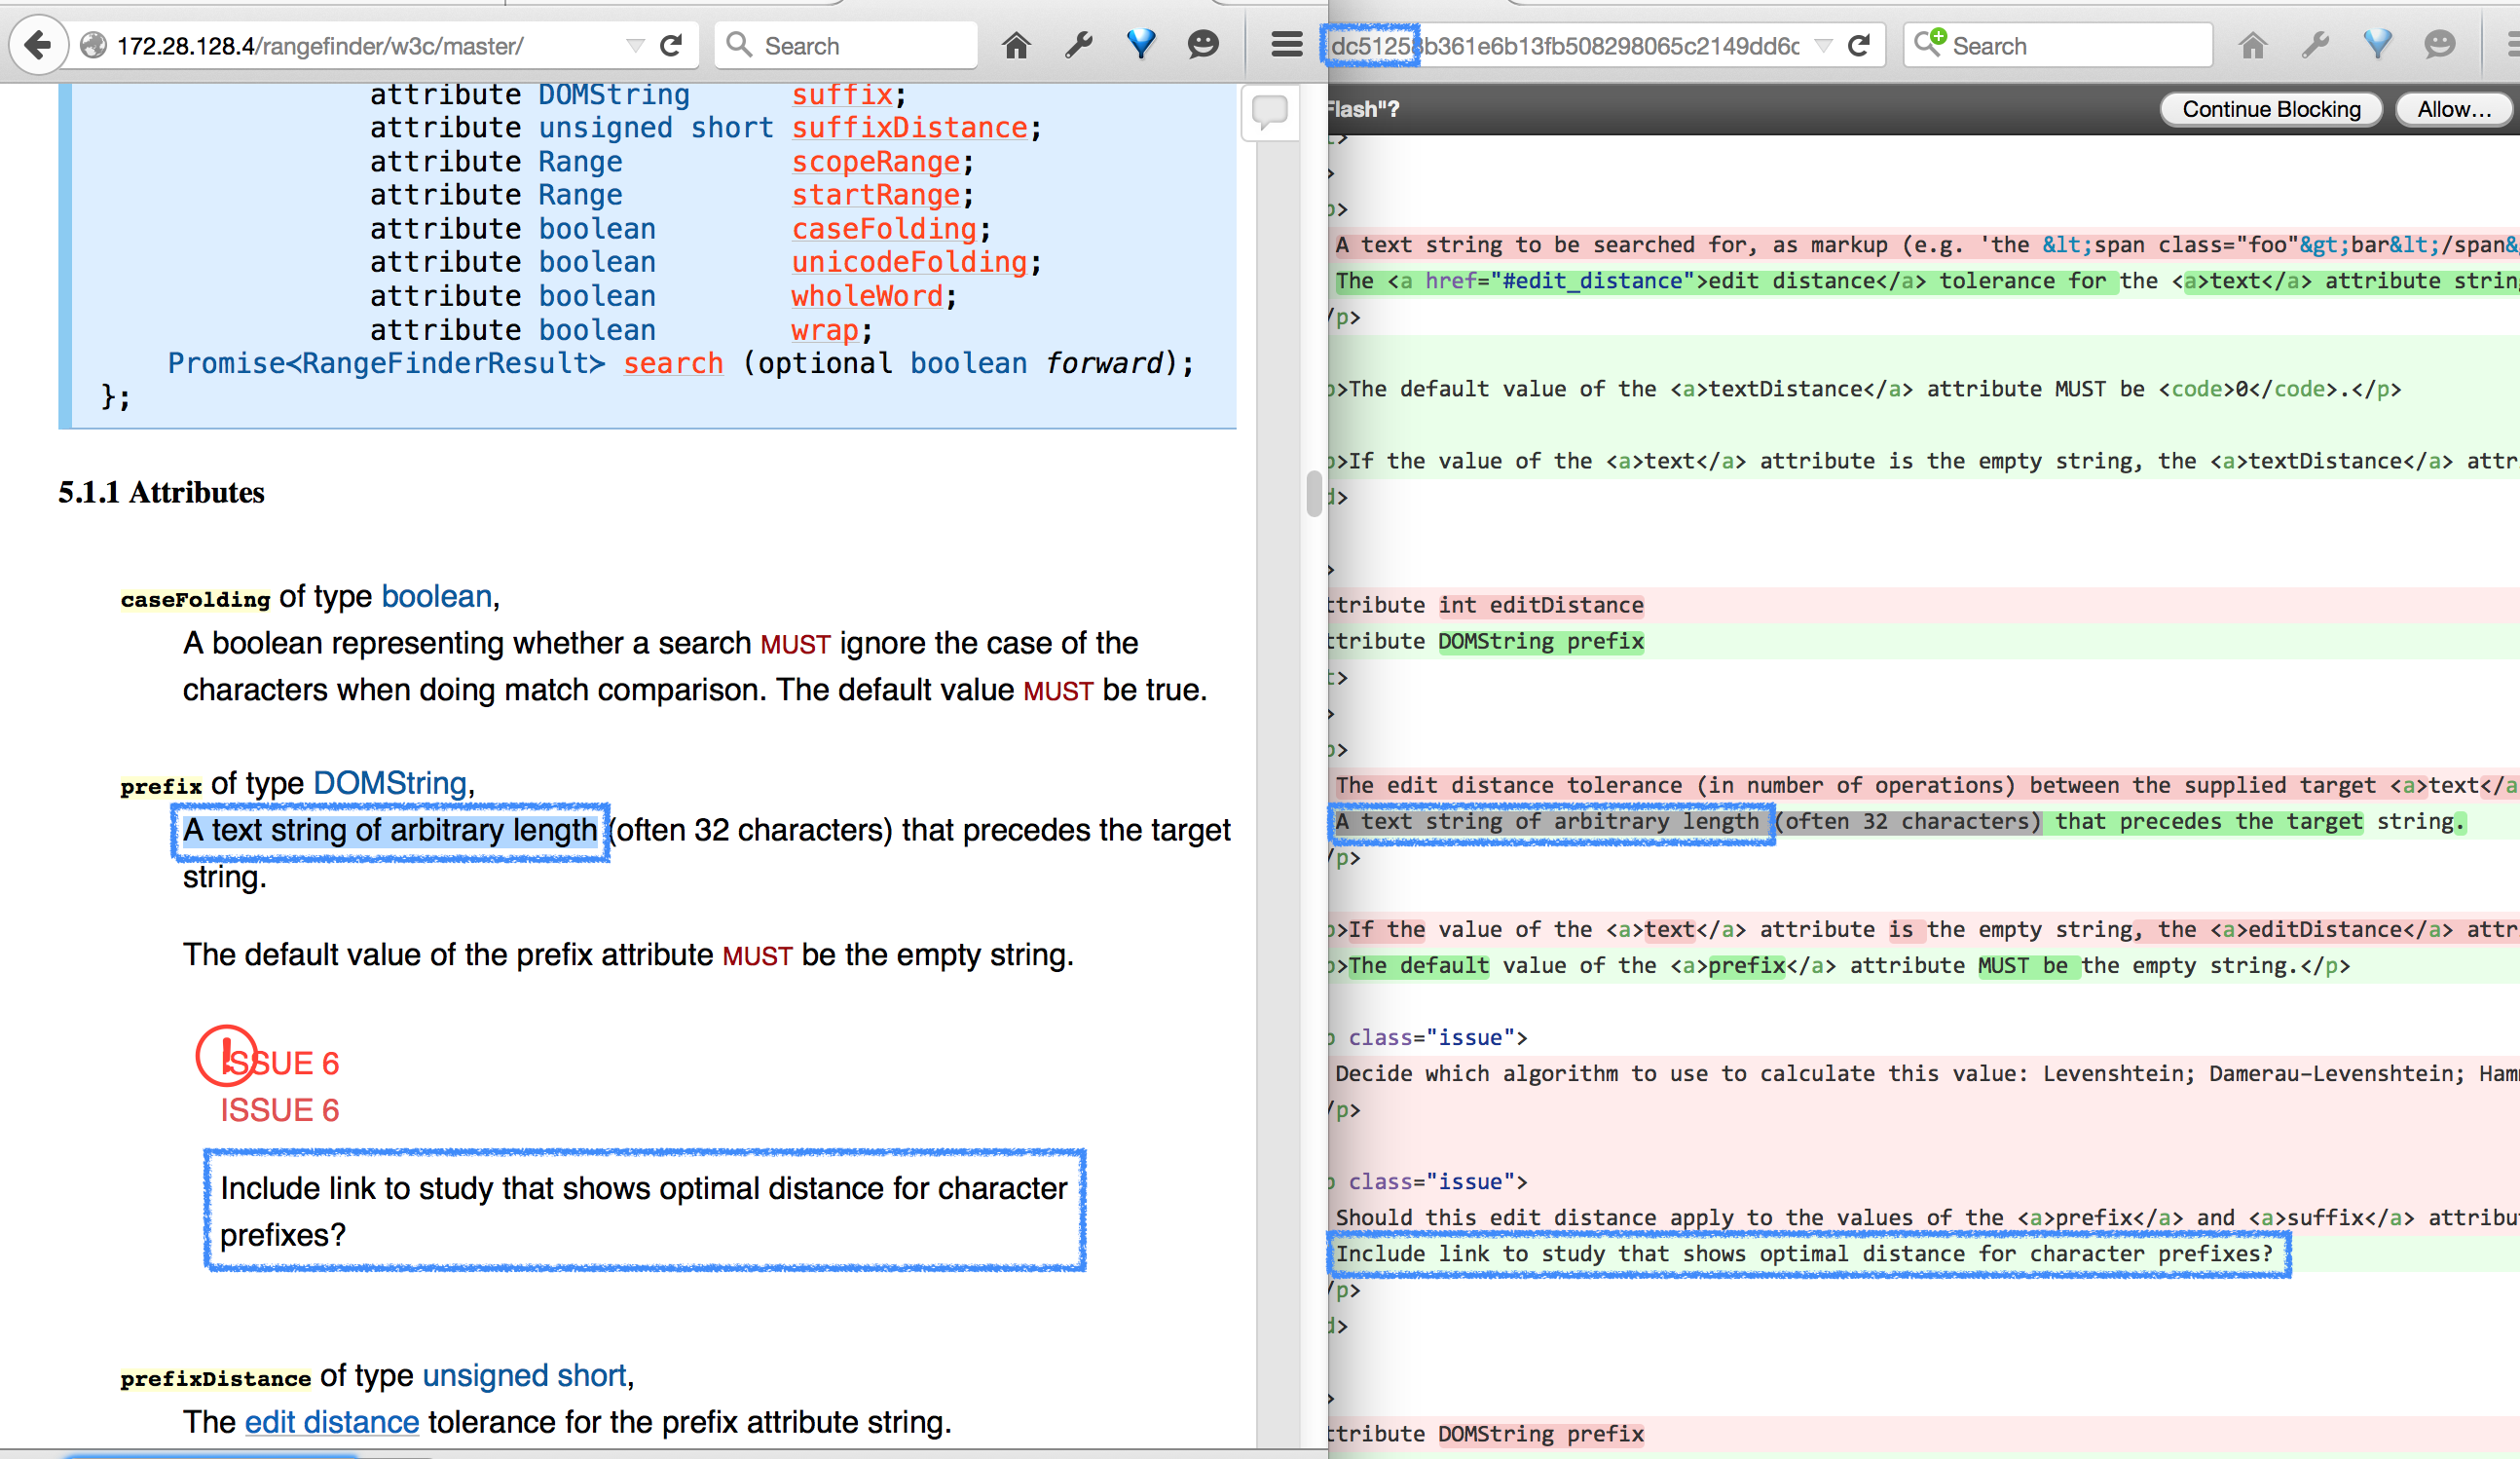 A W3C Specification preview where we can see on the left the specification, and on the right the source highlighting changes in the source